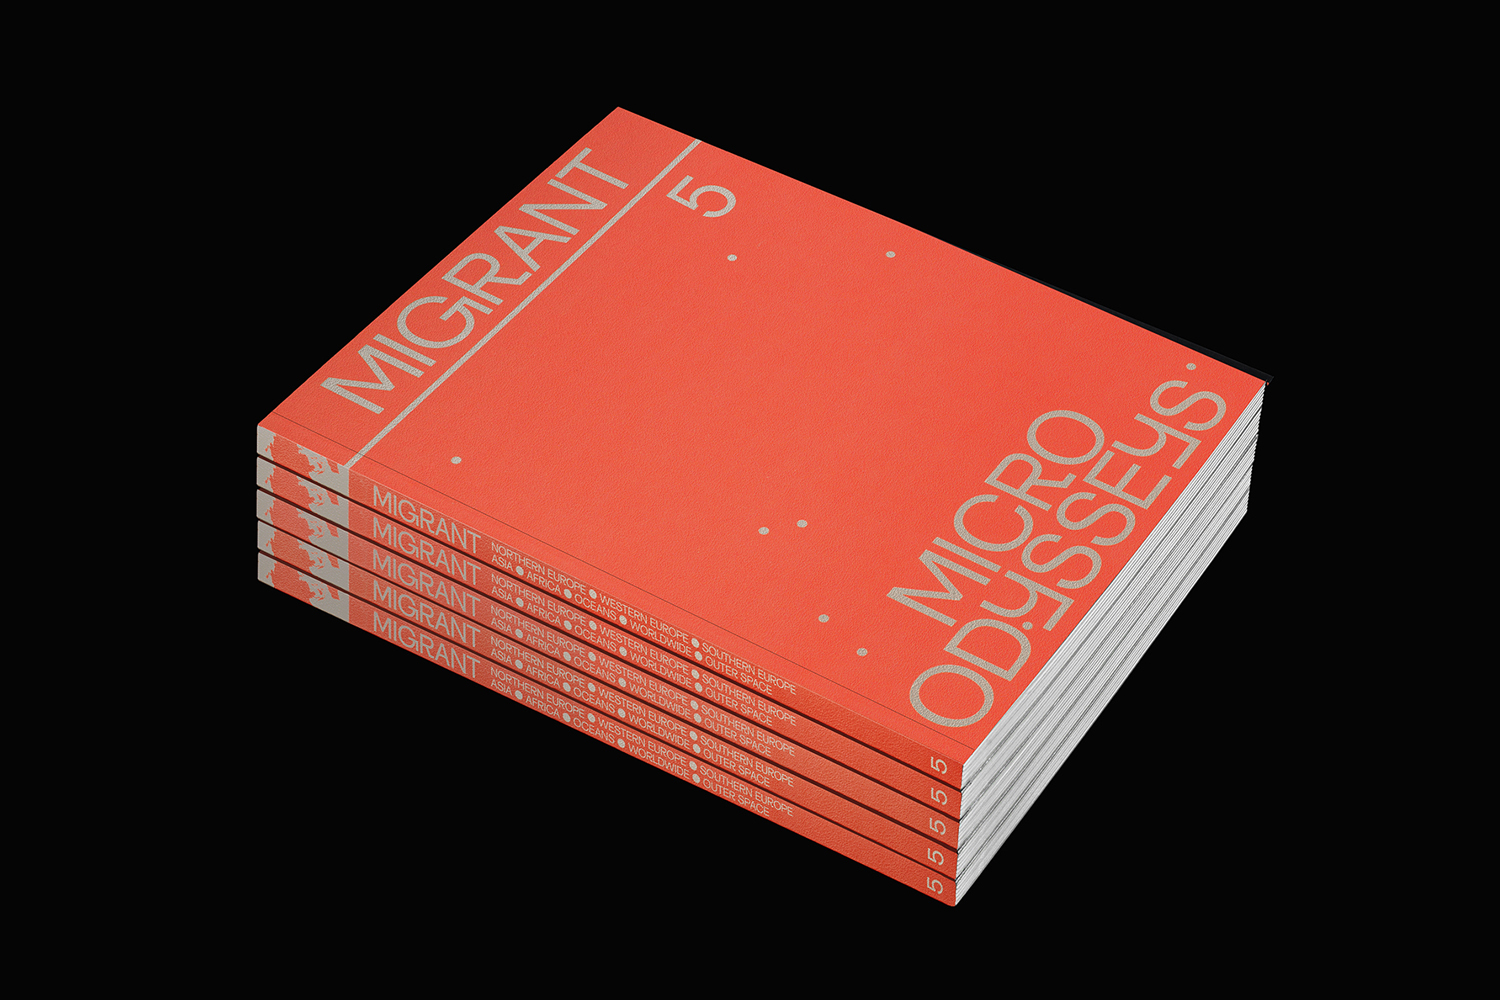 Fluorescent Red Spot Colour: Migrant Journal No.5 by Offshore Studio